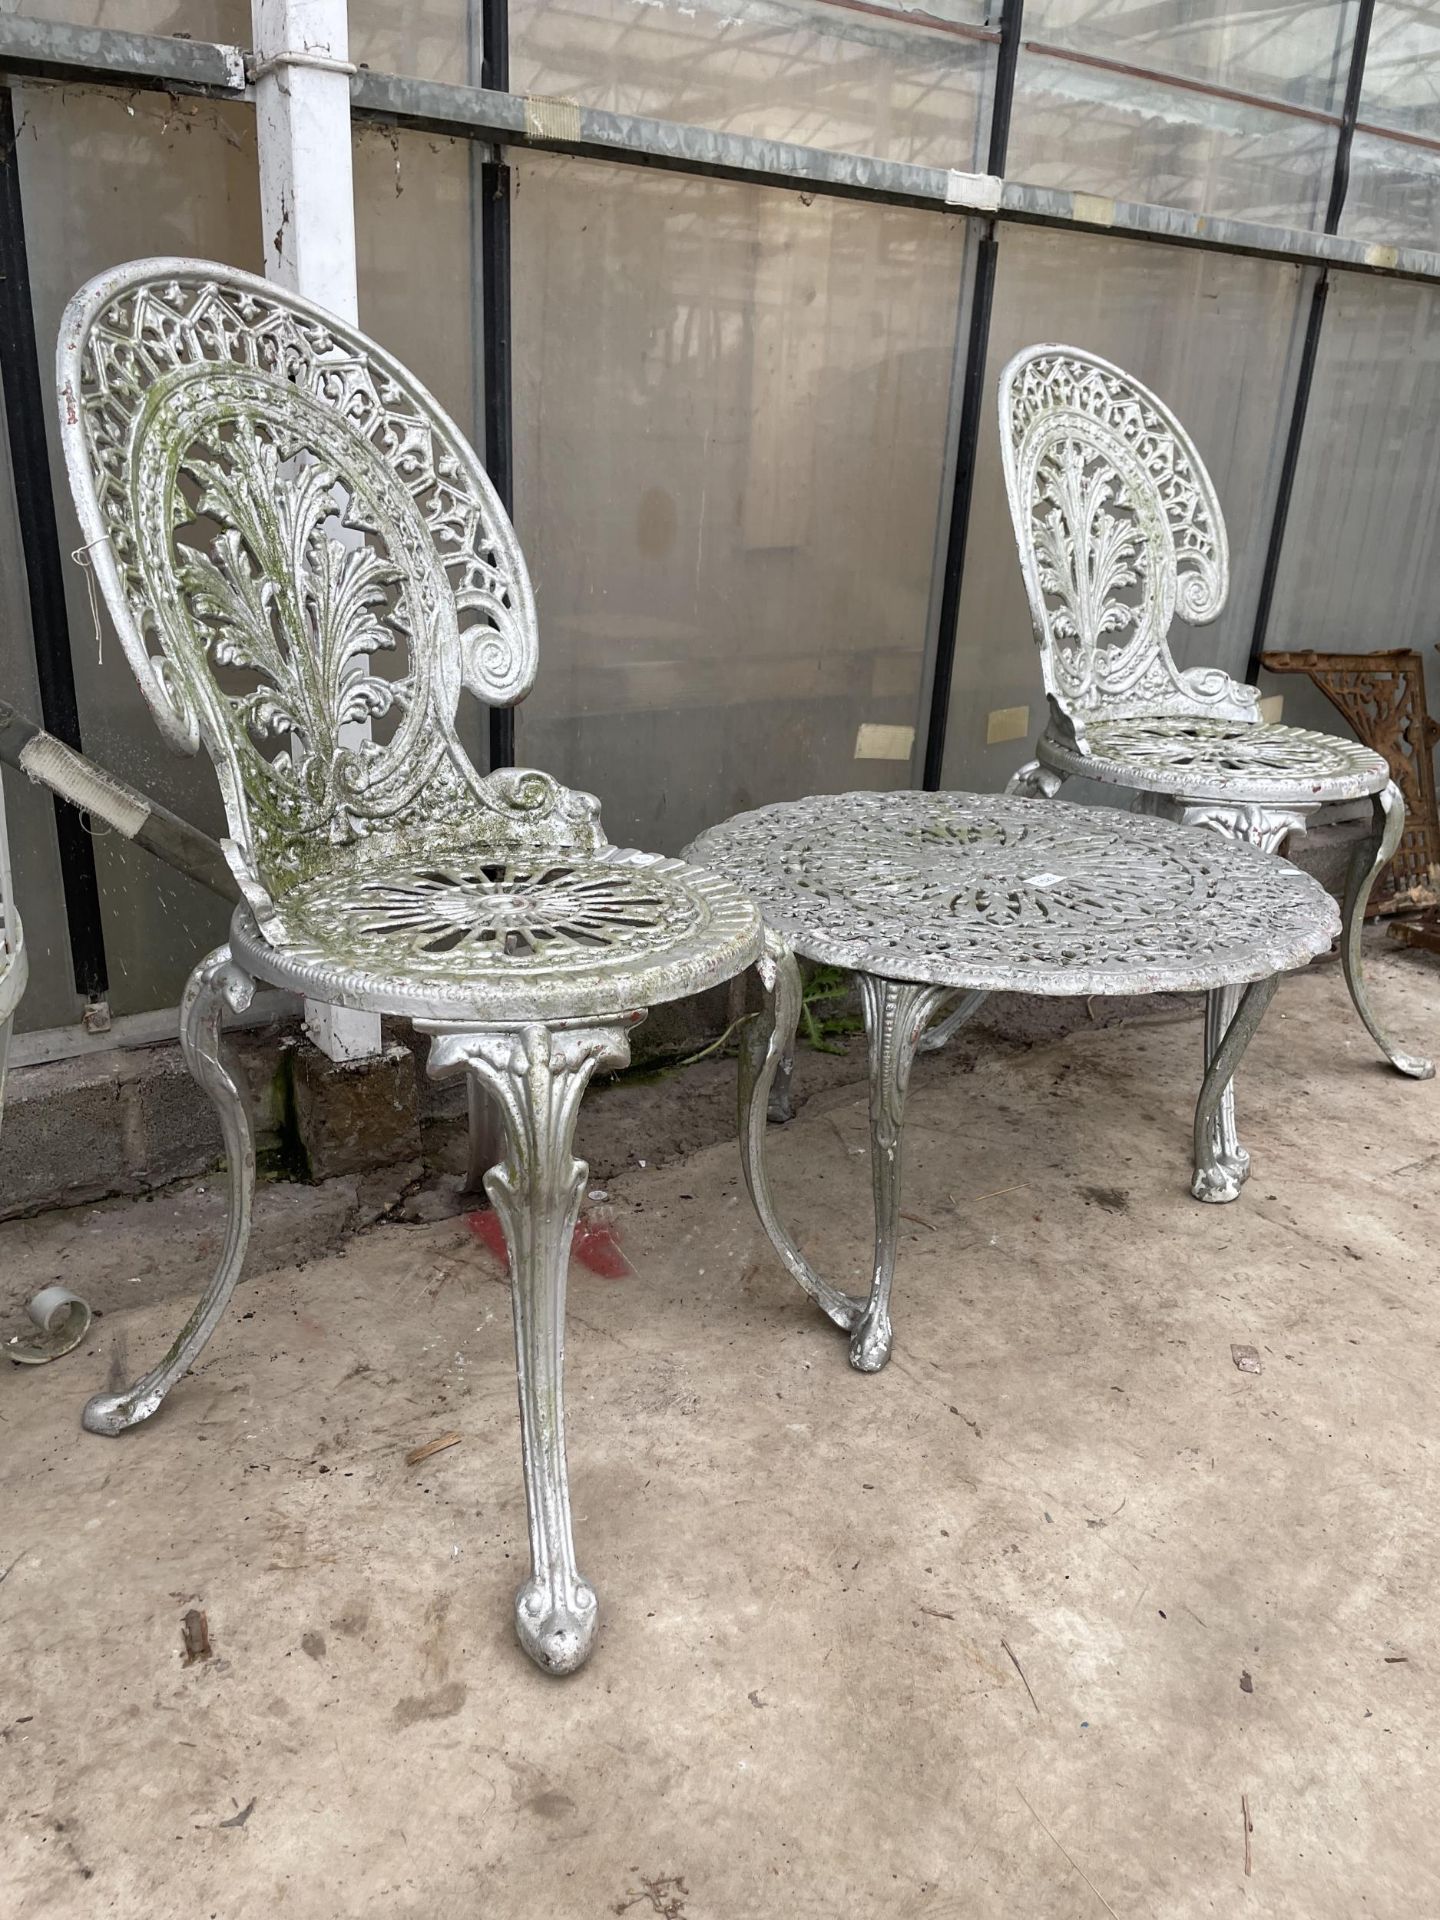 A CAST ALLOY PATIO SET COMPRISING OF TWO CHAIRS AND A ROUND COFFEE TABLE - Bild 2 aus 4